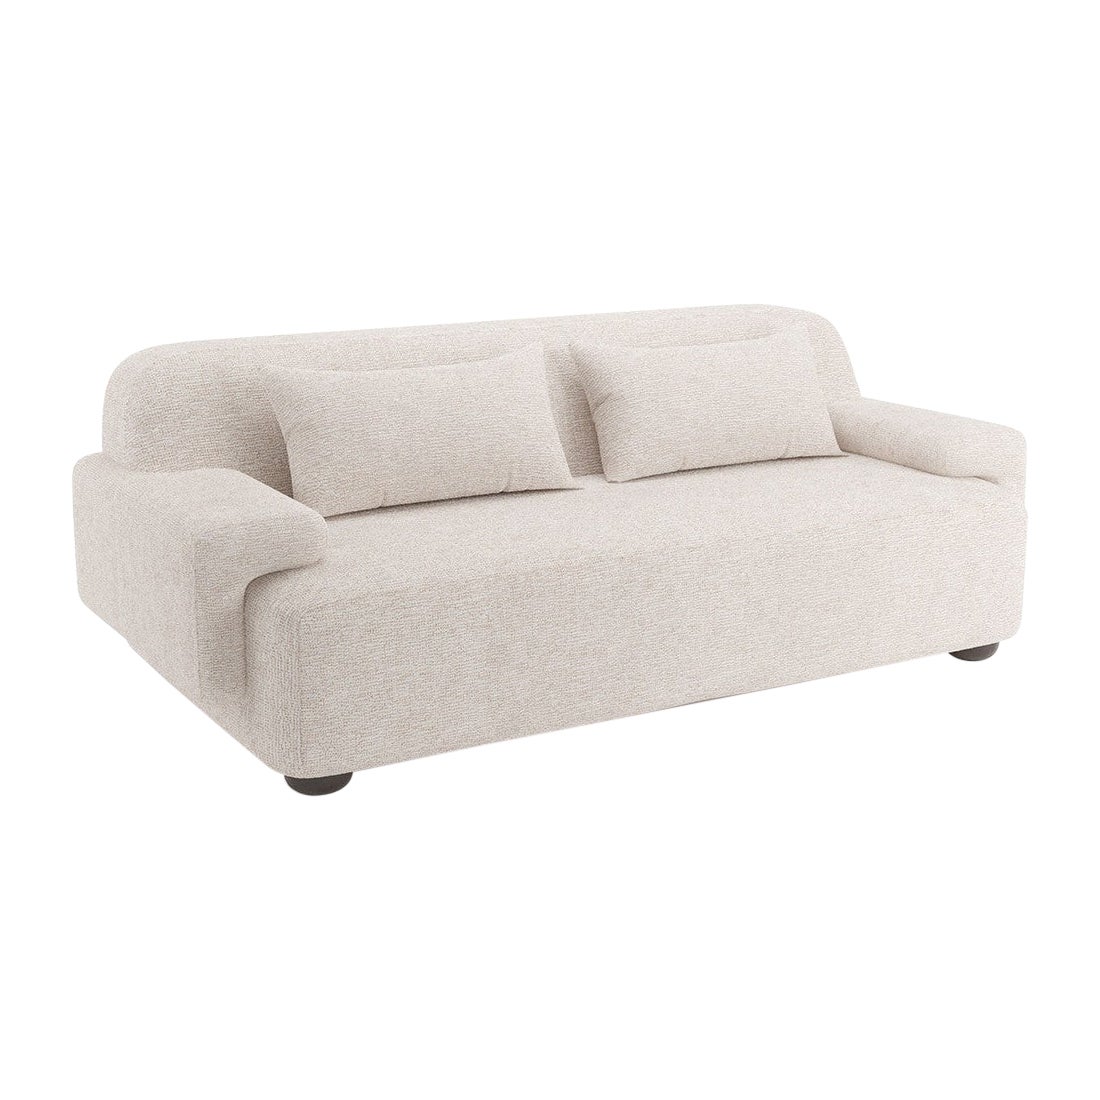 Popus Editions Lena 3 Seater Sofa in Otter Megeve Fabric with Knit Effect For Sale